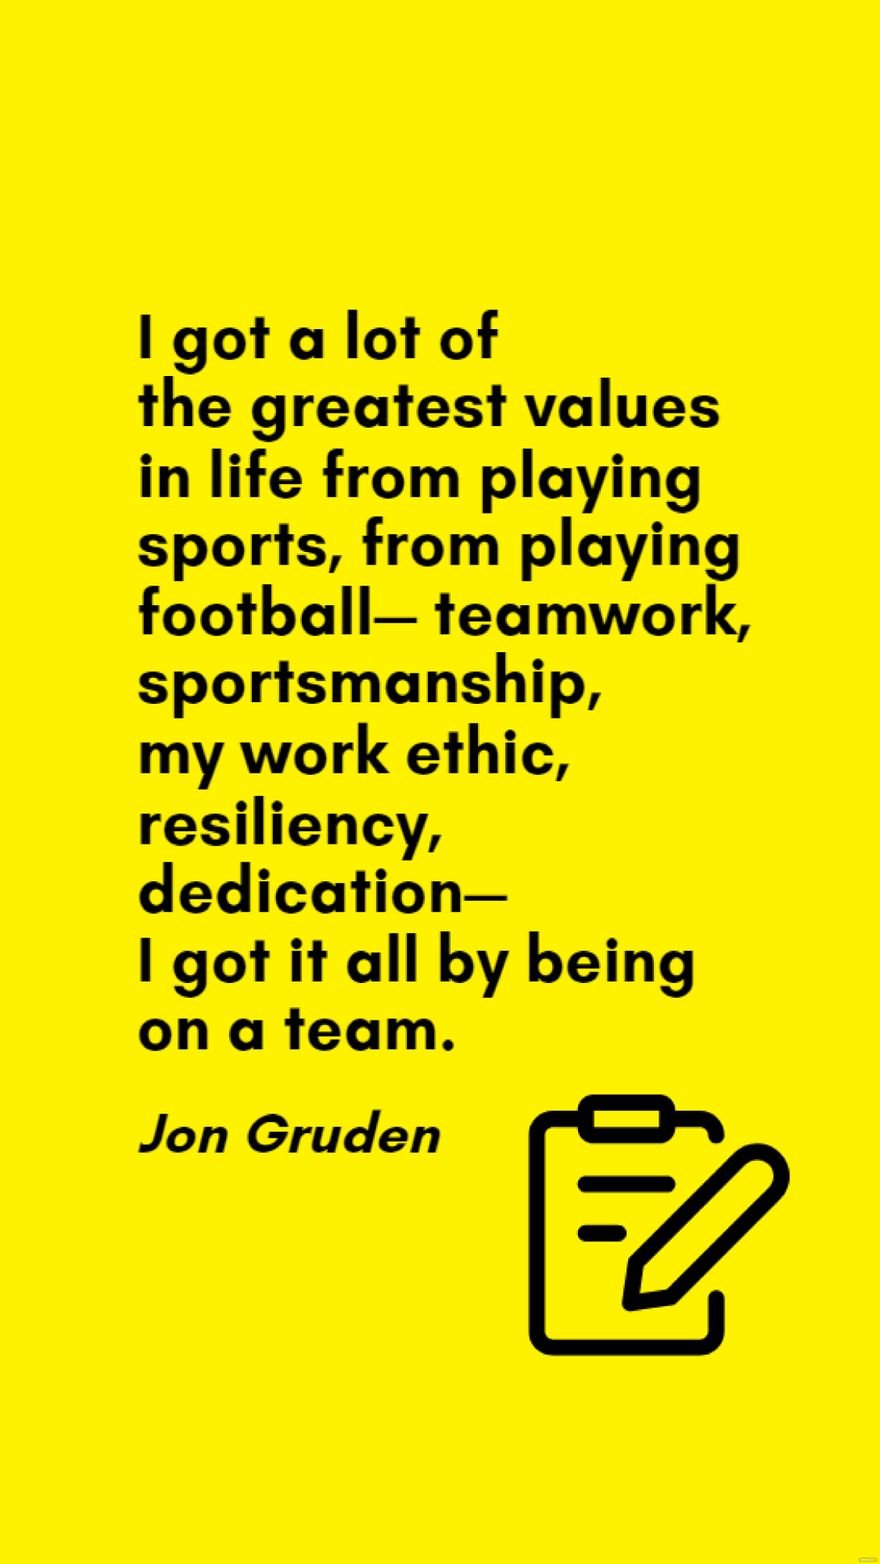 Jon Gruden - I got a lot of the greatest values in life from playing sports, from playing football - teamwork, sportsmanship, my work ethic, resiliency, dedication - I got it all by being on a team.